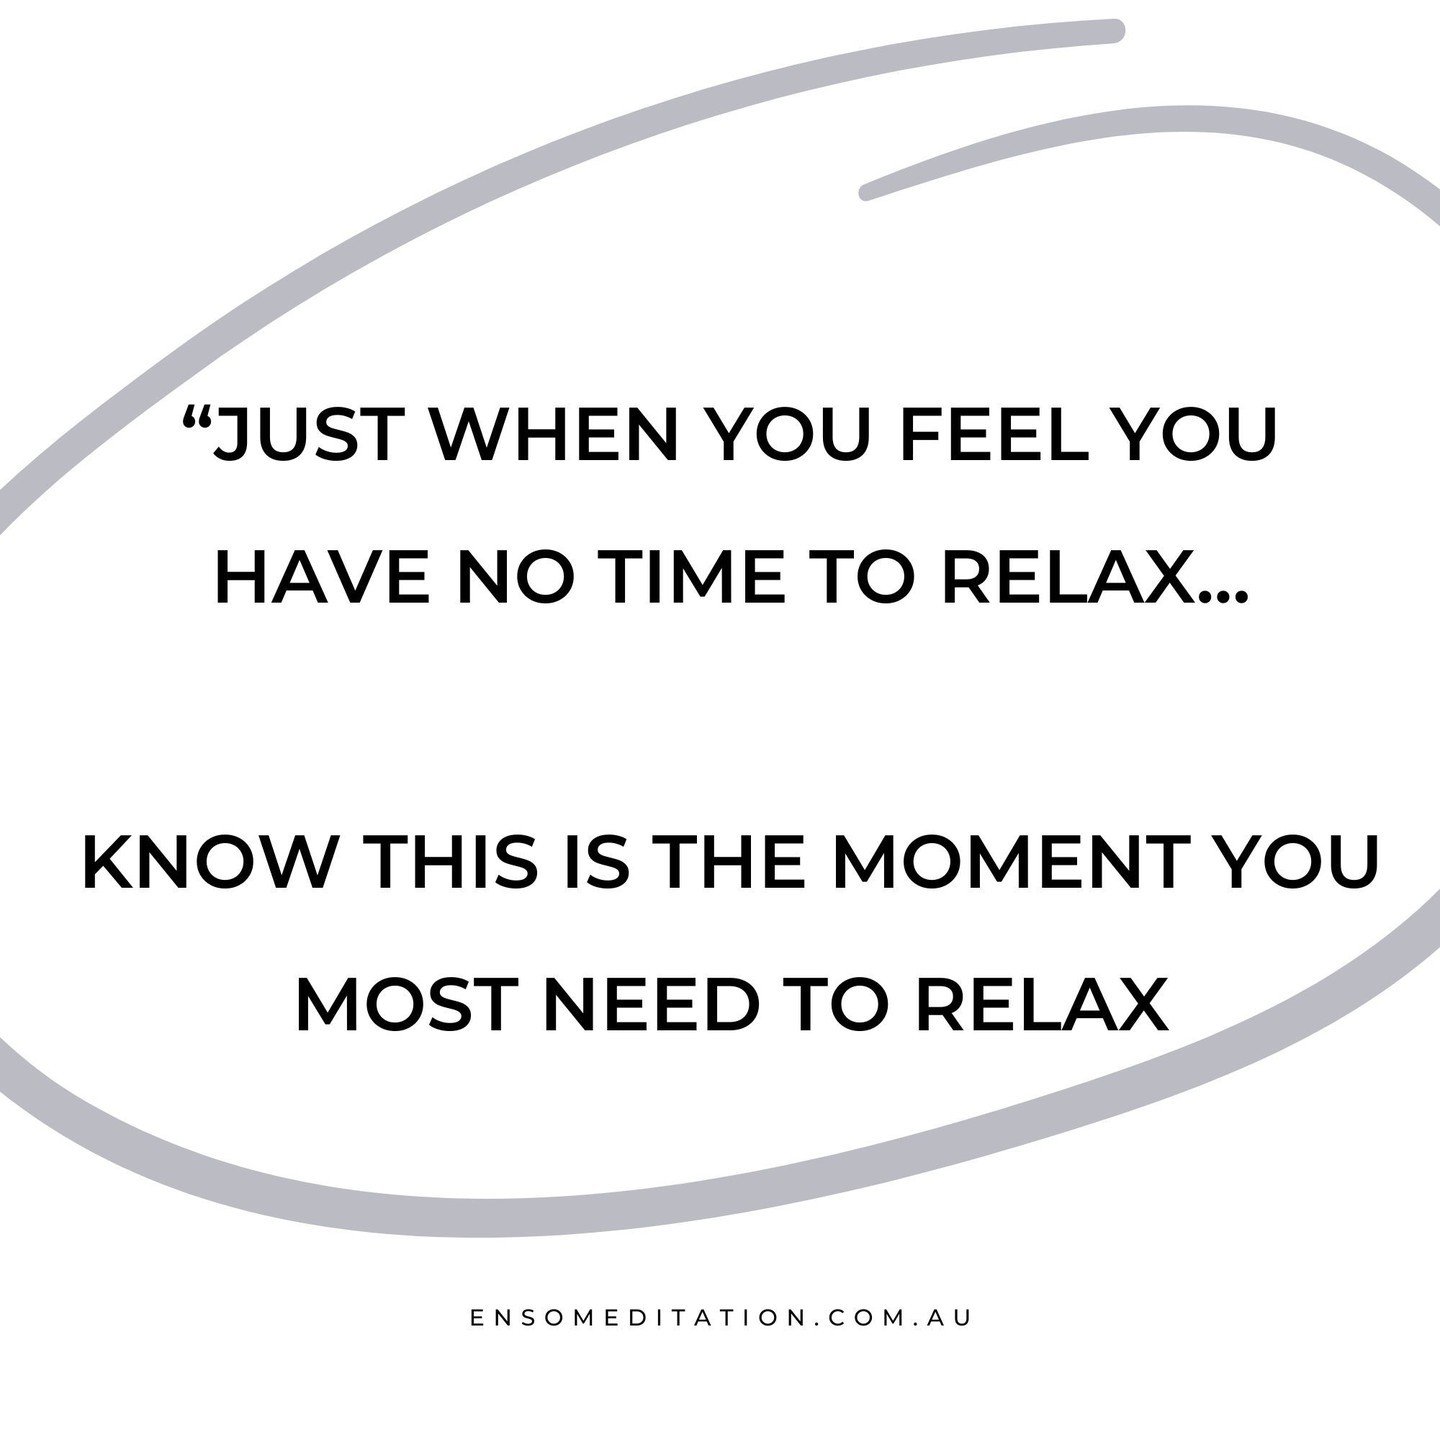 Feeling back-to-back with meetings, deadlines, and the daily hustle? Remember, it's precisely when your schedule is bursting at the seams that a moment of relaxation isn&rsquo;t just nice&mdash;it&rsquo;s necessary. 

Taking time to unwind and breath